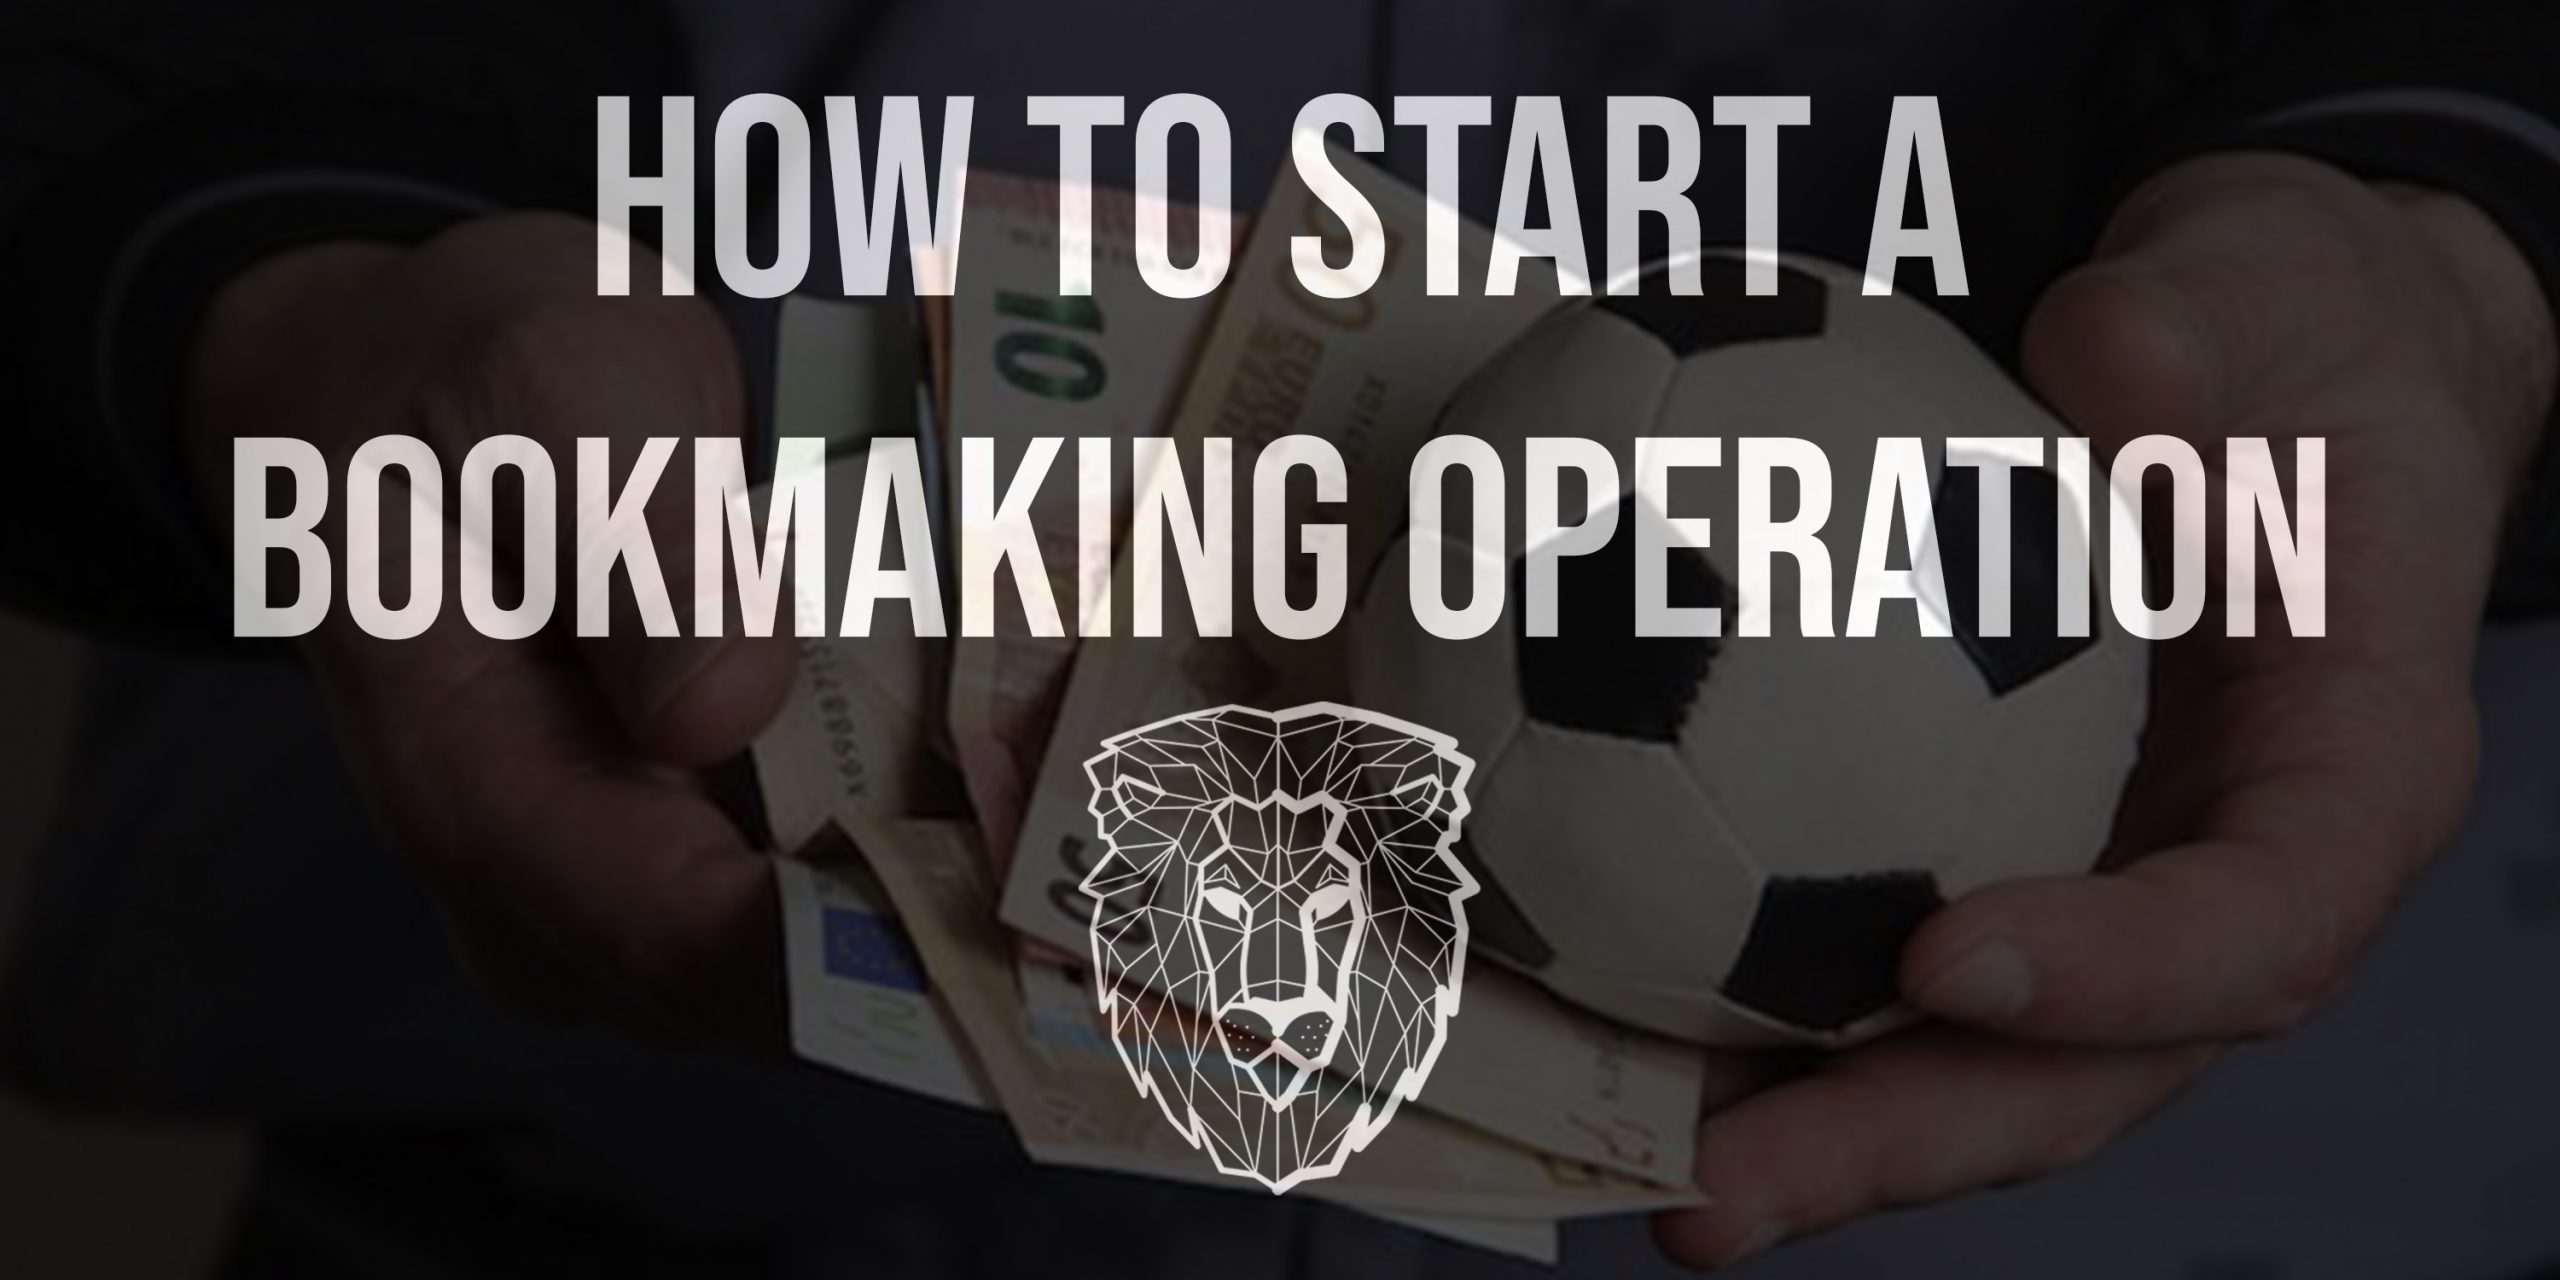 sports betting services, how to start a bookmaking operation, how do sportsbooks make money